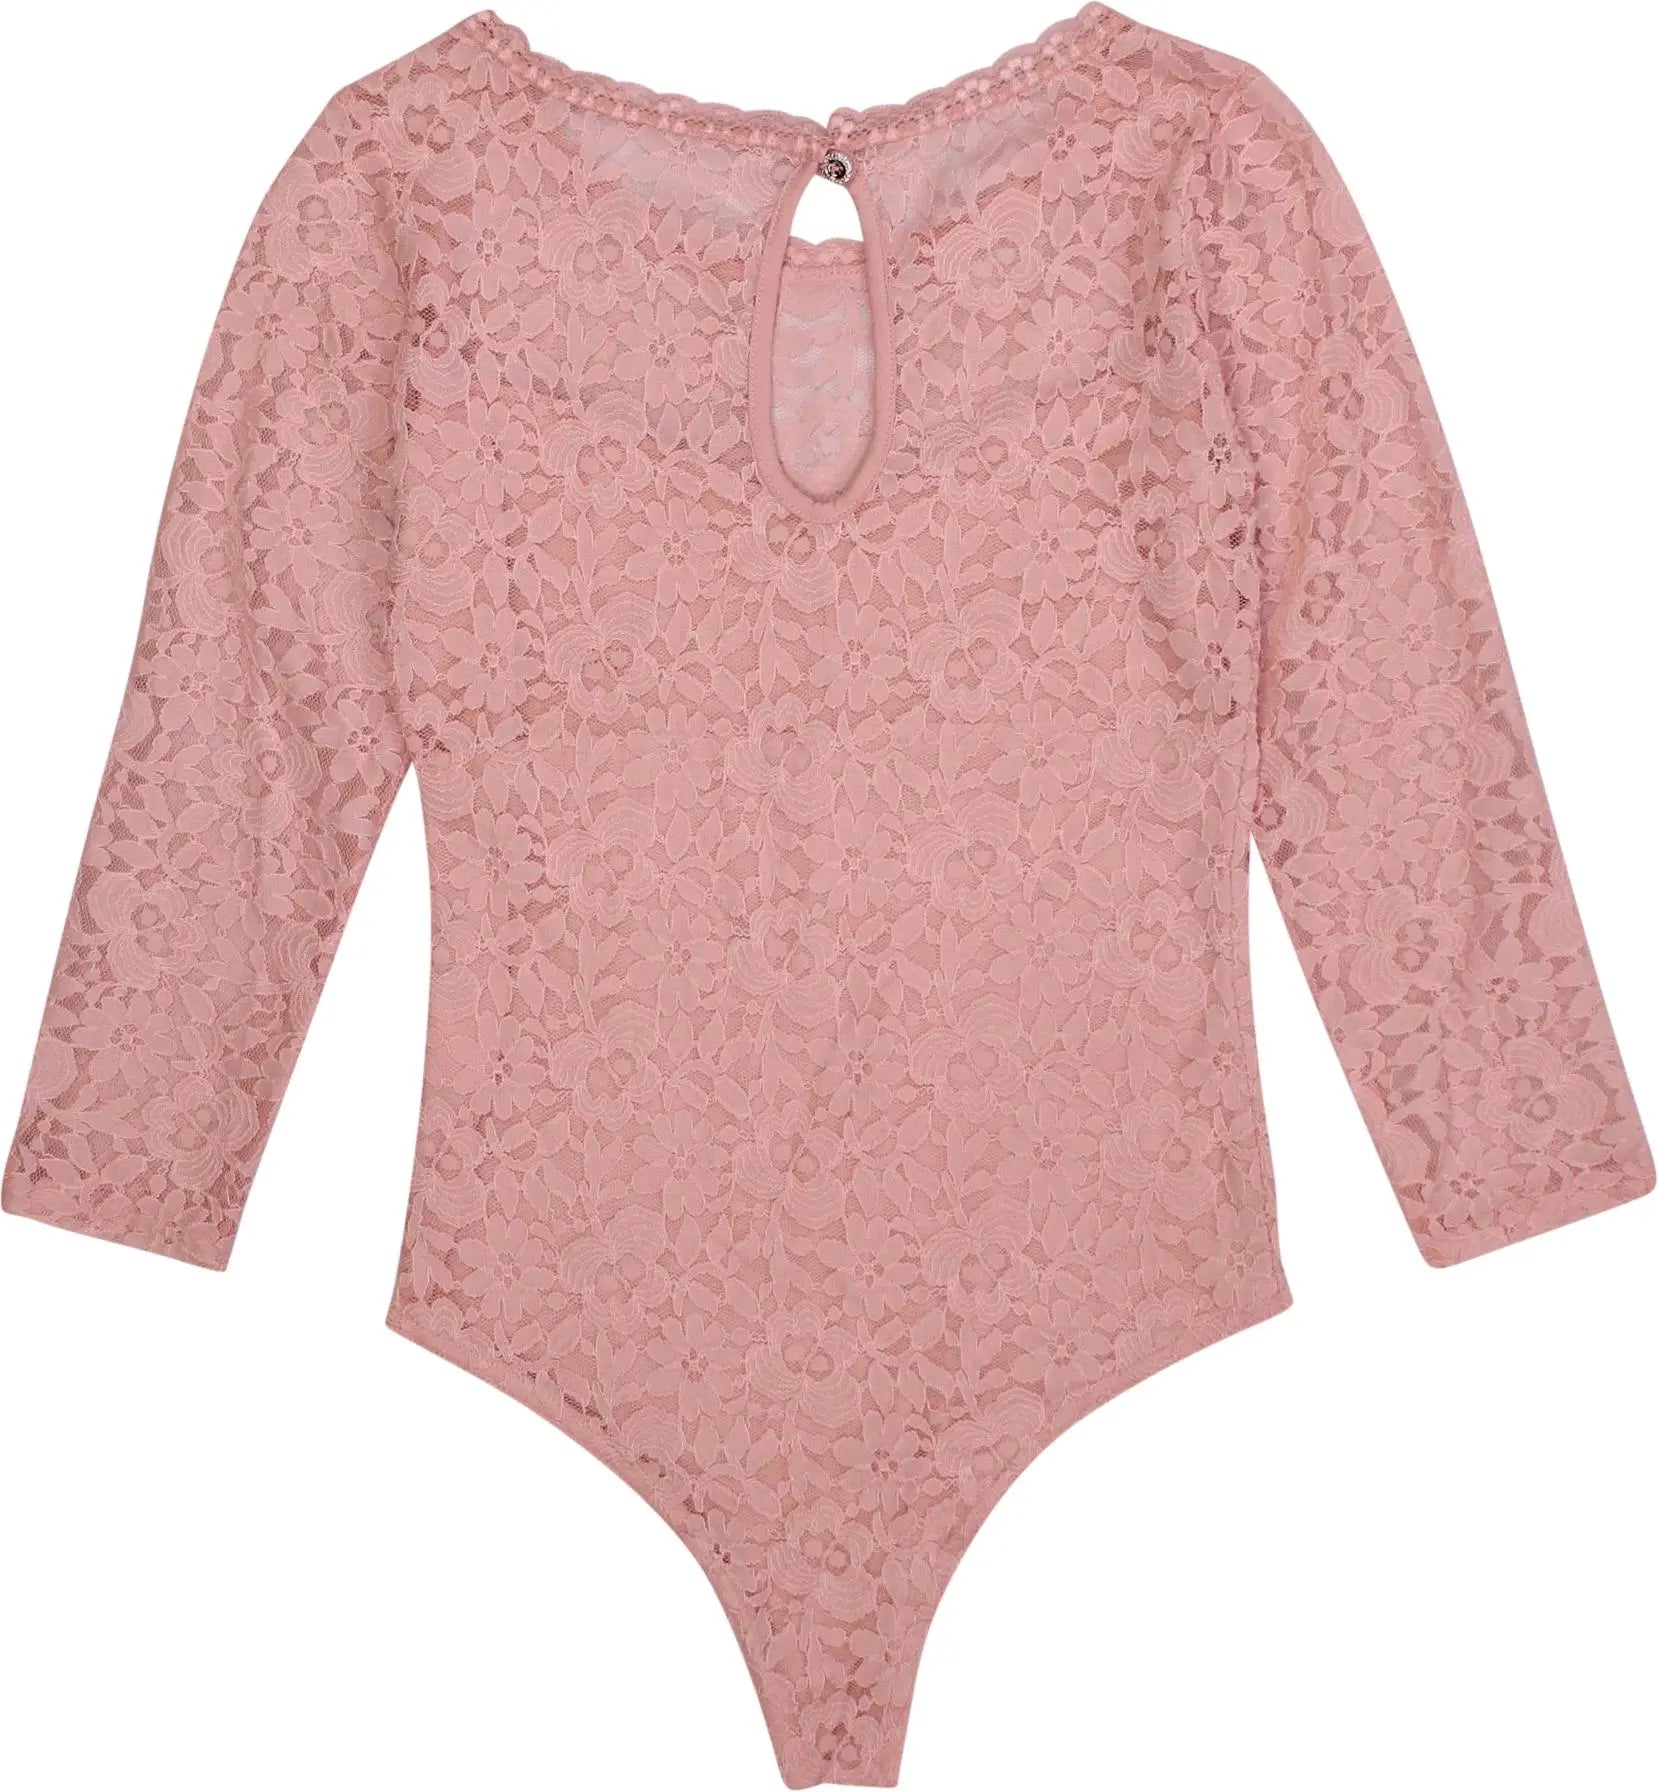 Unknown - Pink Lace Bodysuit- ThriftTale.com - Vintage and second handclothing